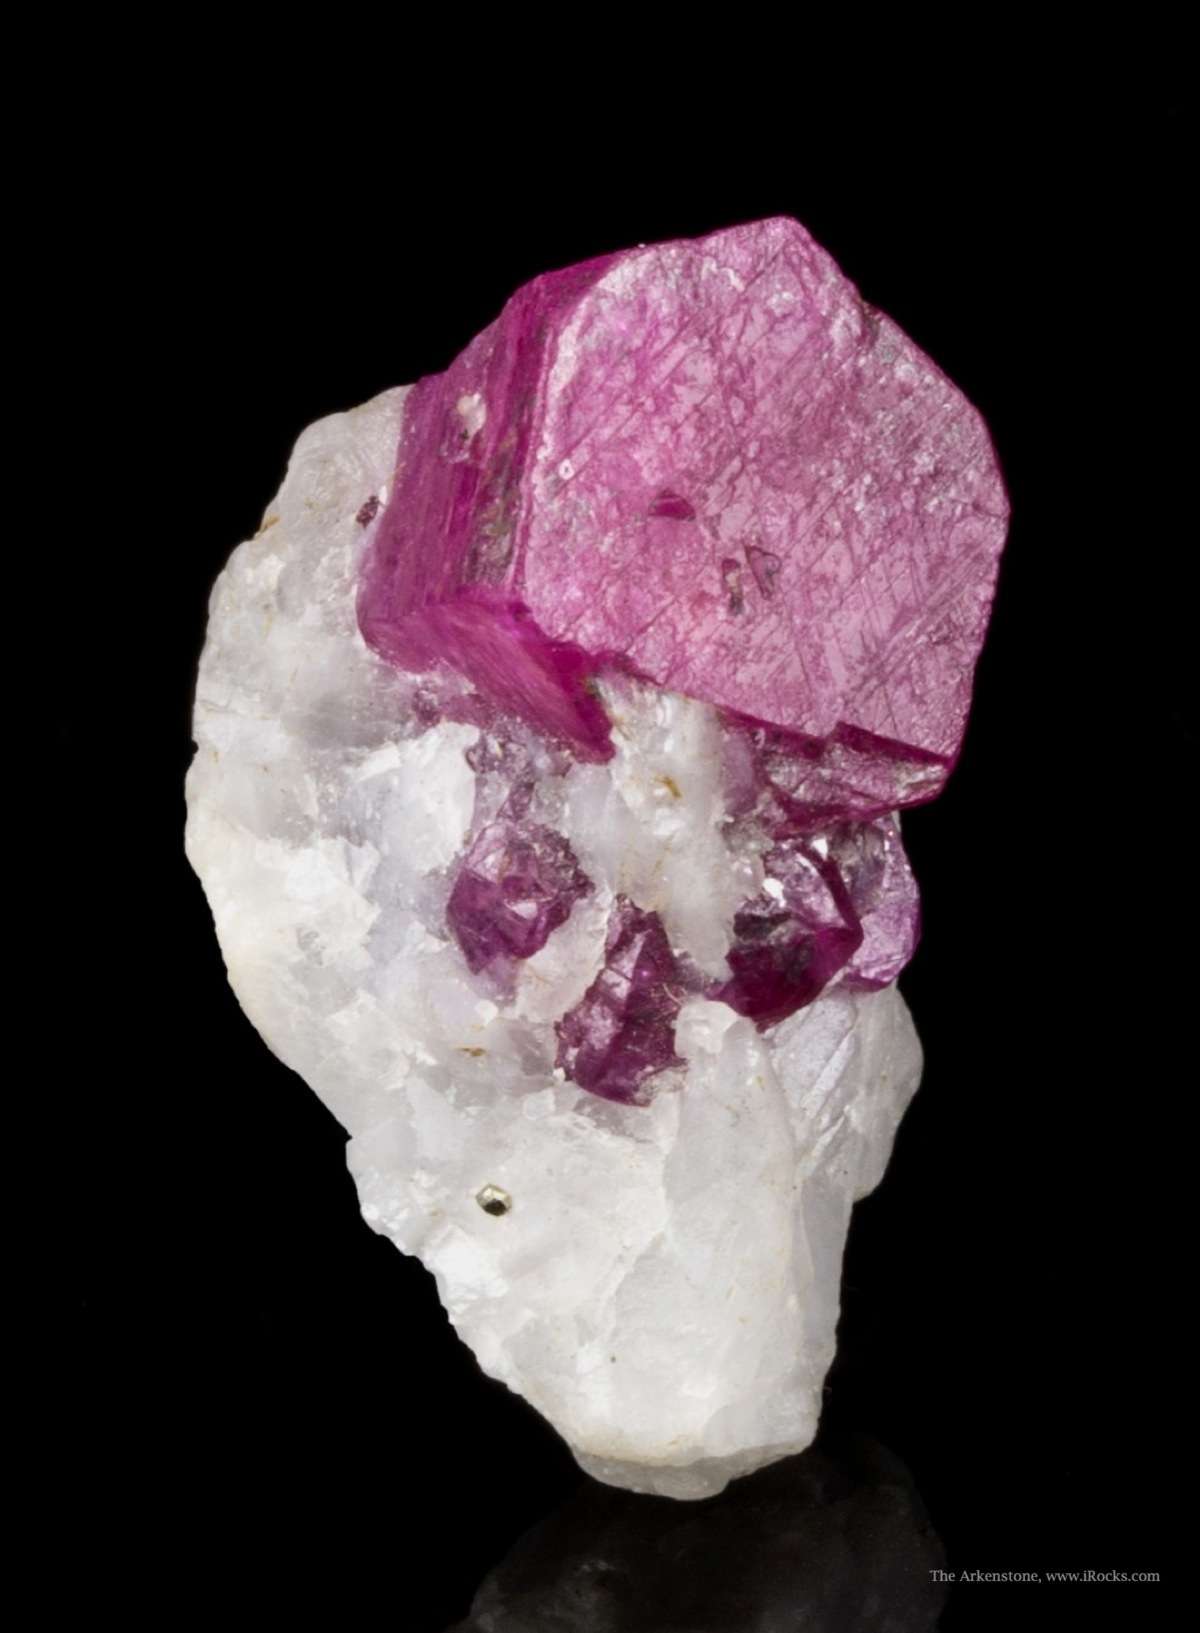 Delicate Ruby Thumbnail from Afghanistan | iRocks.com